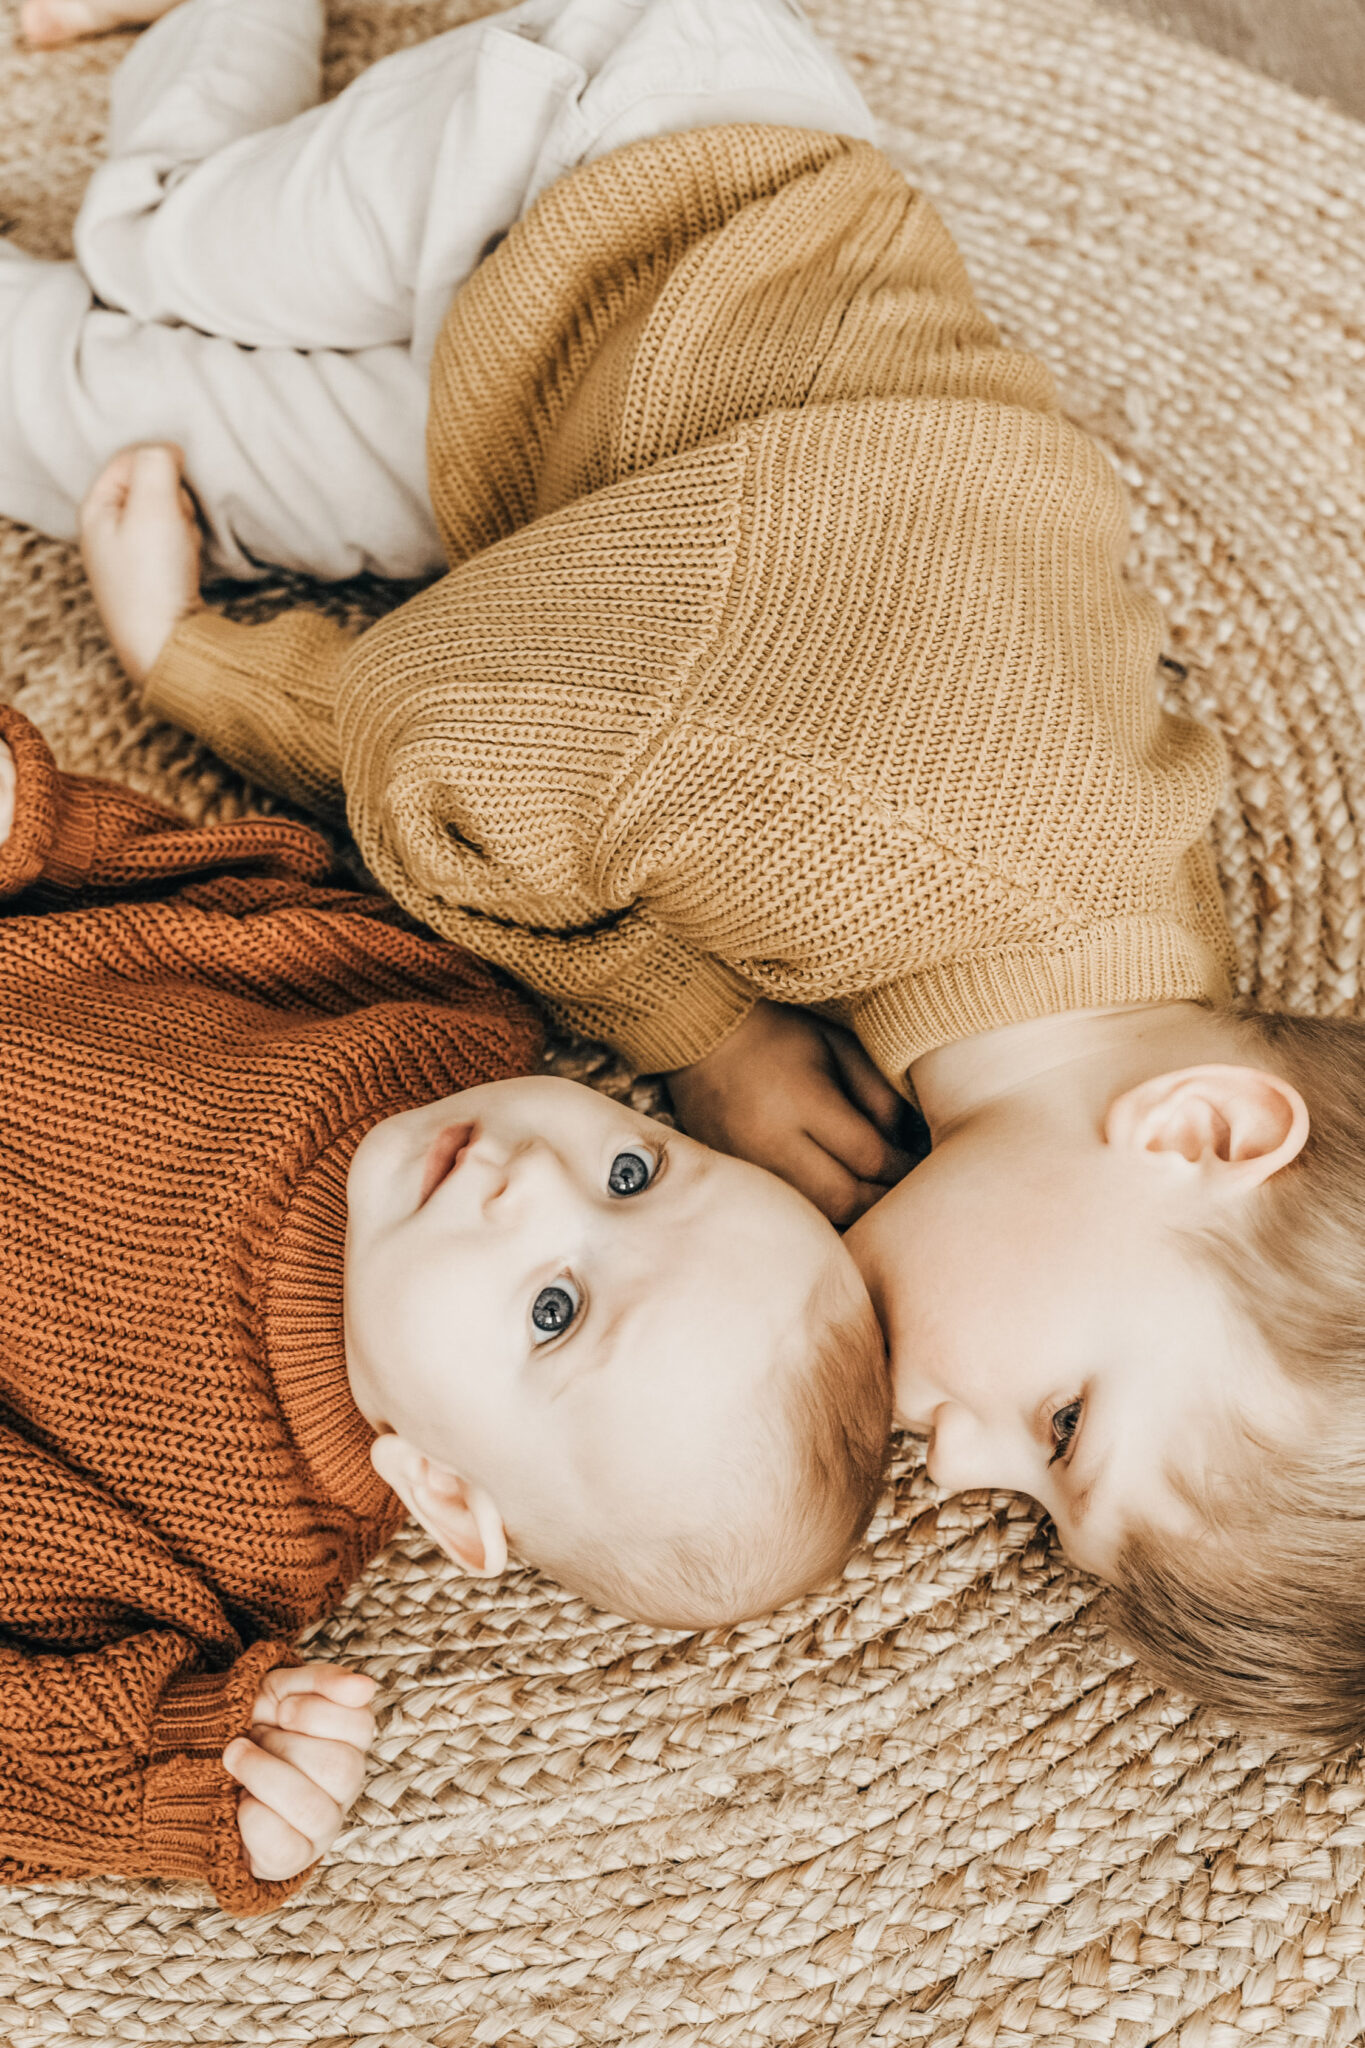 A toddler boy lay son a rattan rug with his newborn sibling. This article covers staying fit when you have a newborn or toddler. 